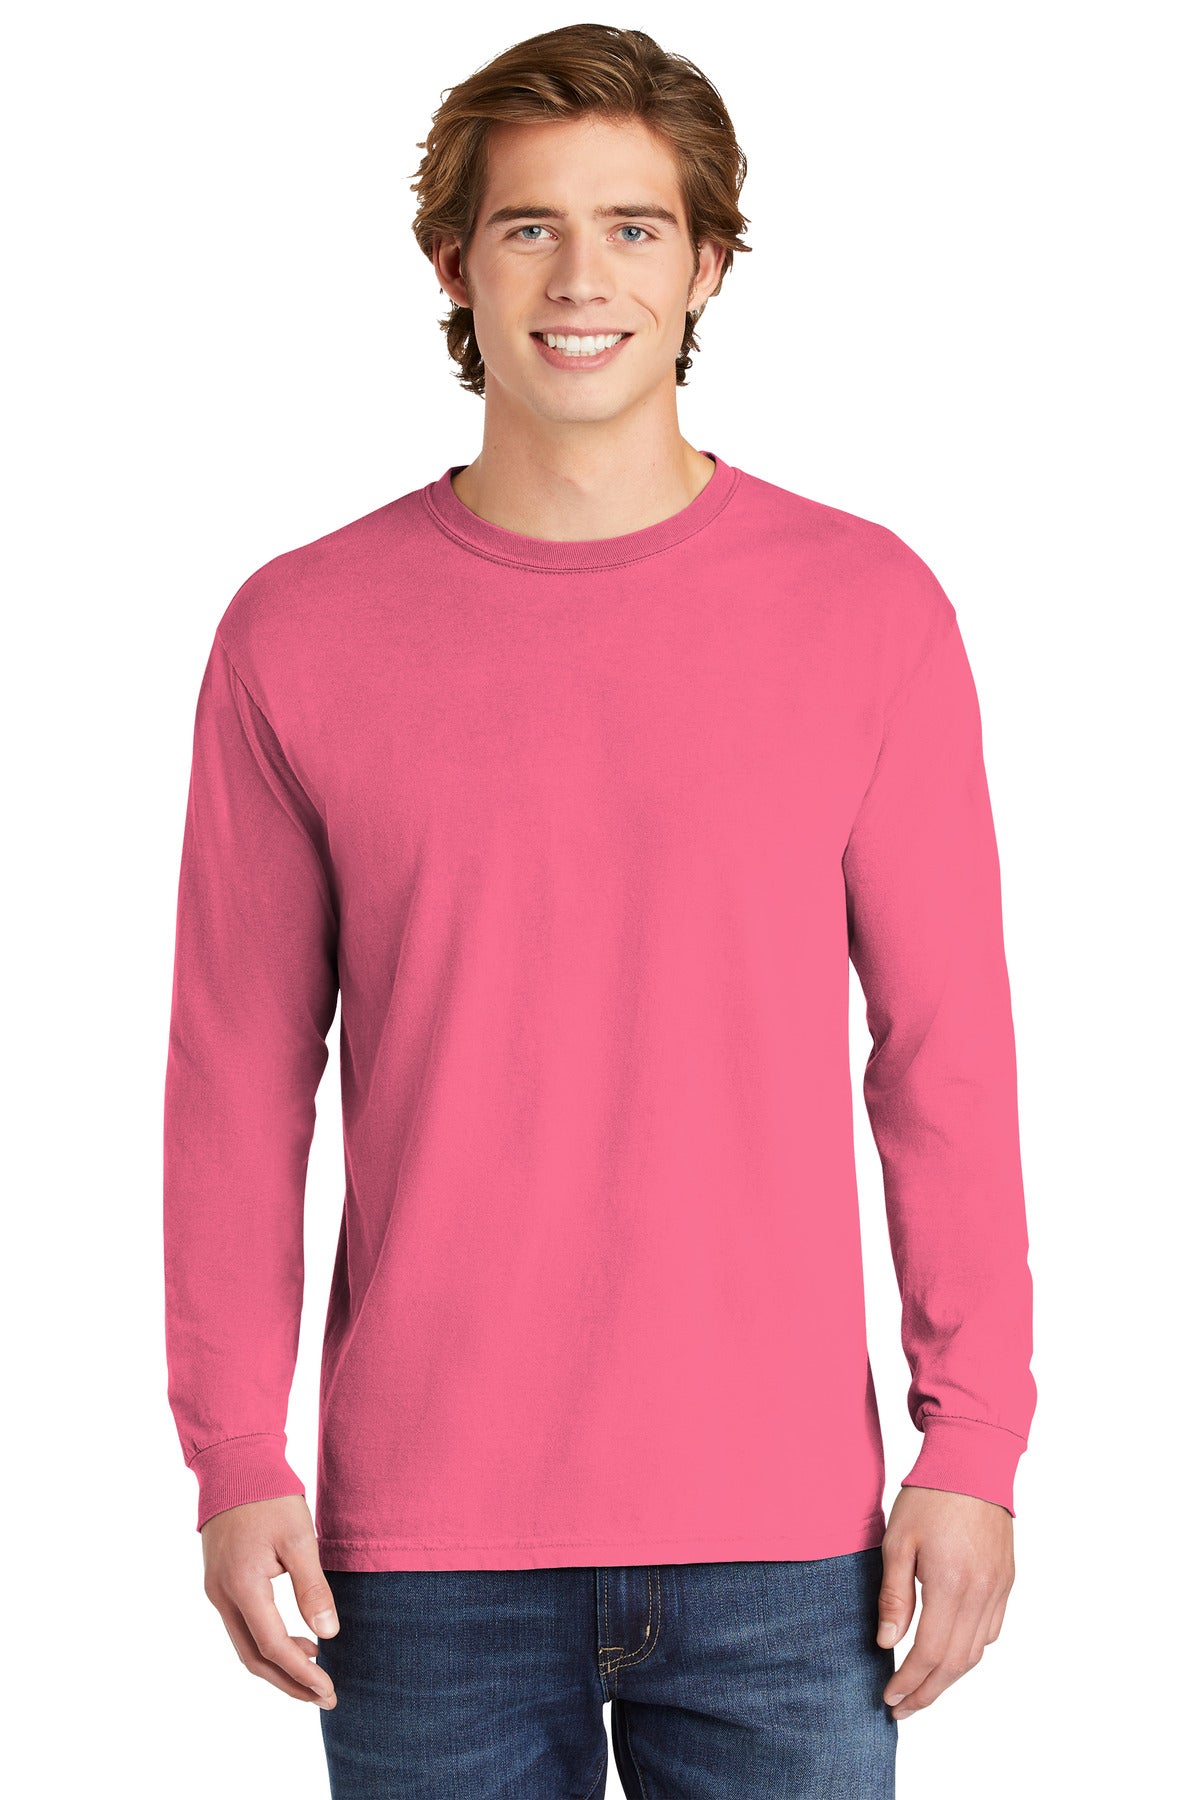 T-Shirts Crunchberry Comfort Colors